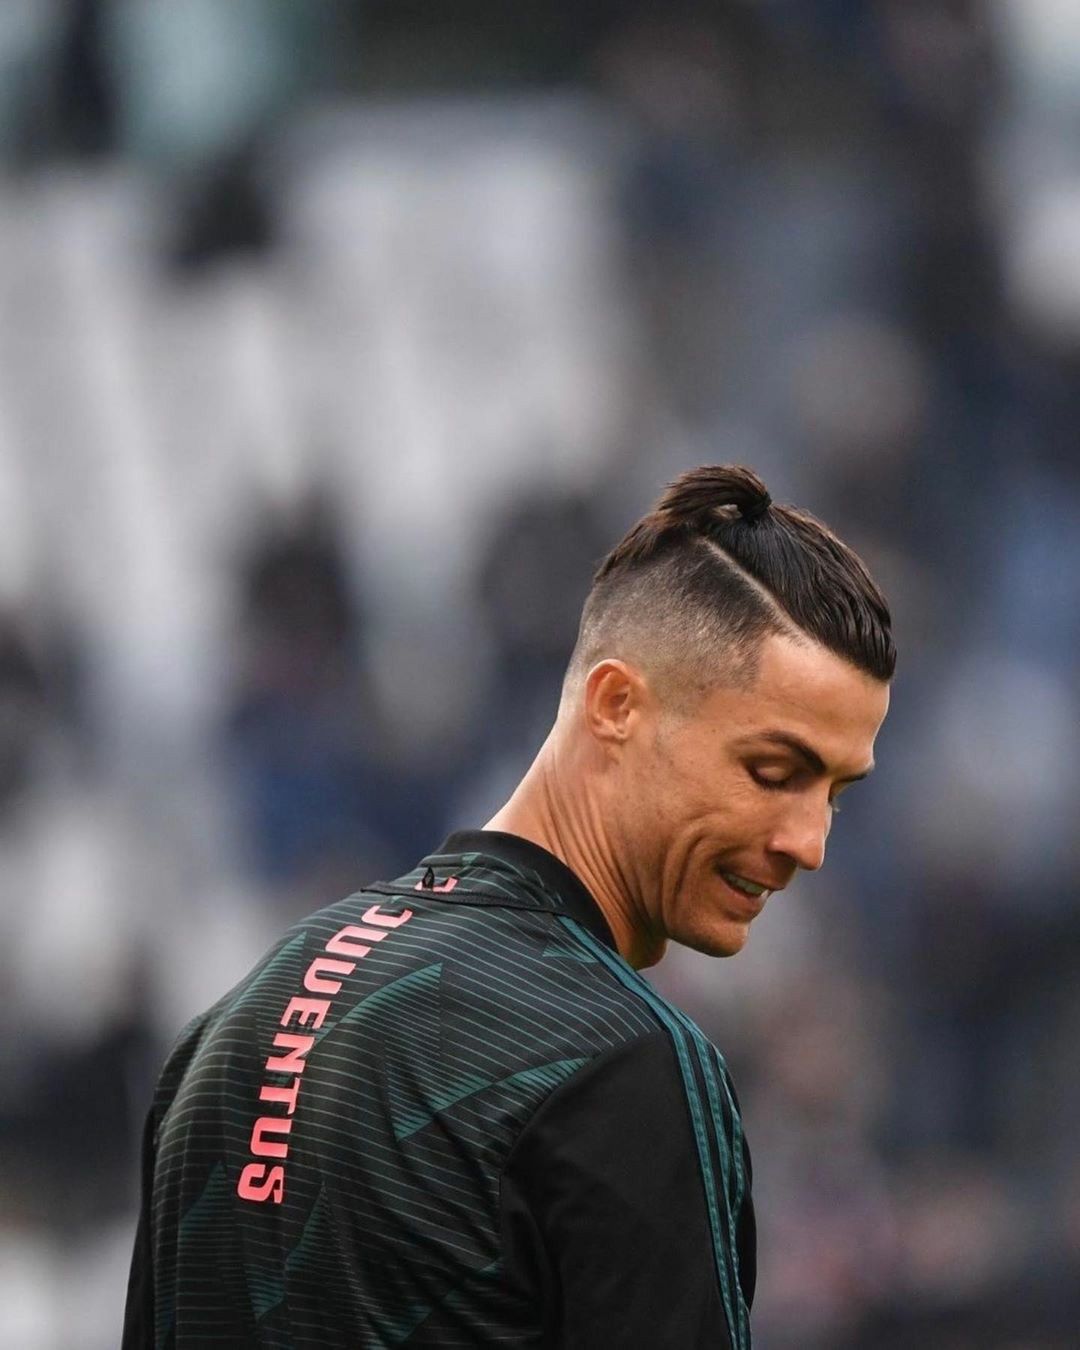 What is the name of this cristiano ronaldo haircut. I have similar thick  wavy/curly hair and would like to get the haircut. : r/Hair